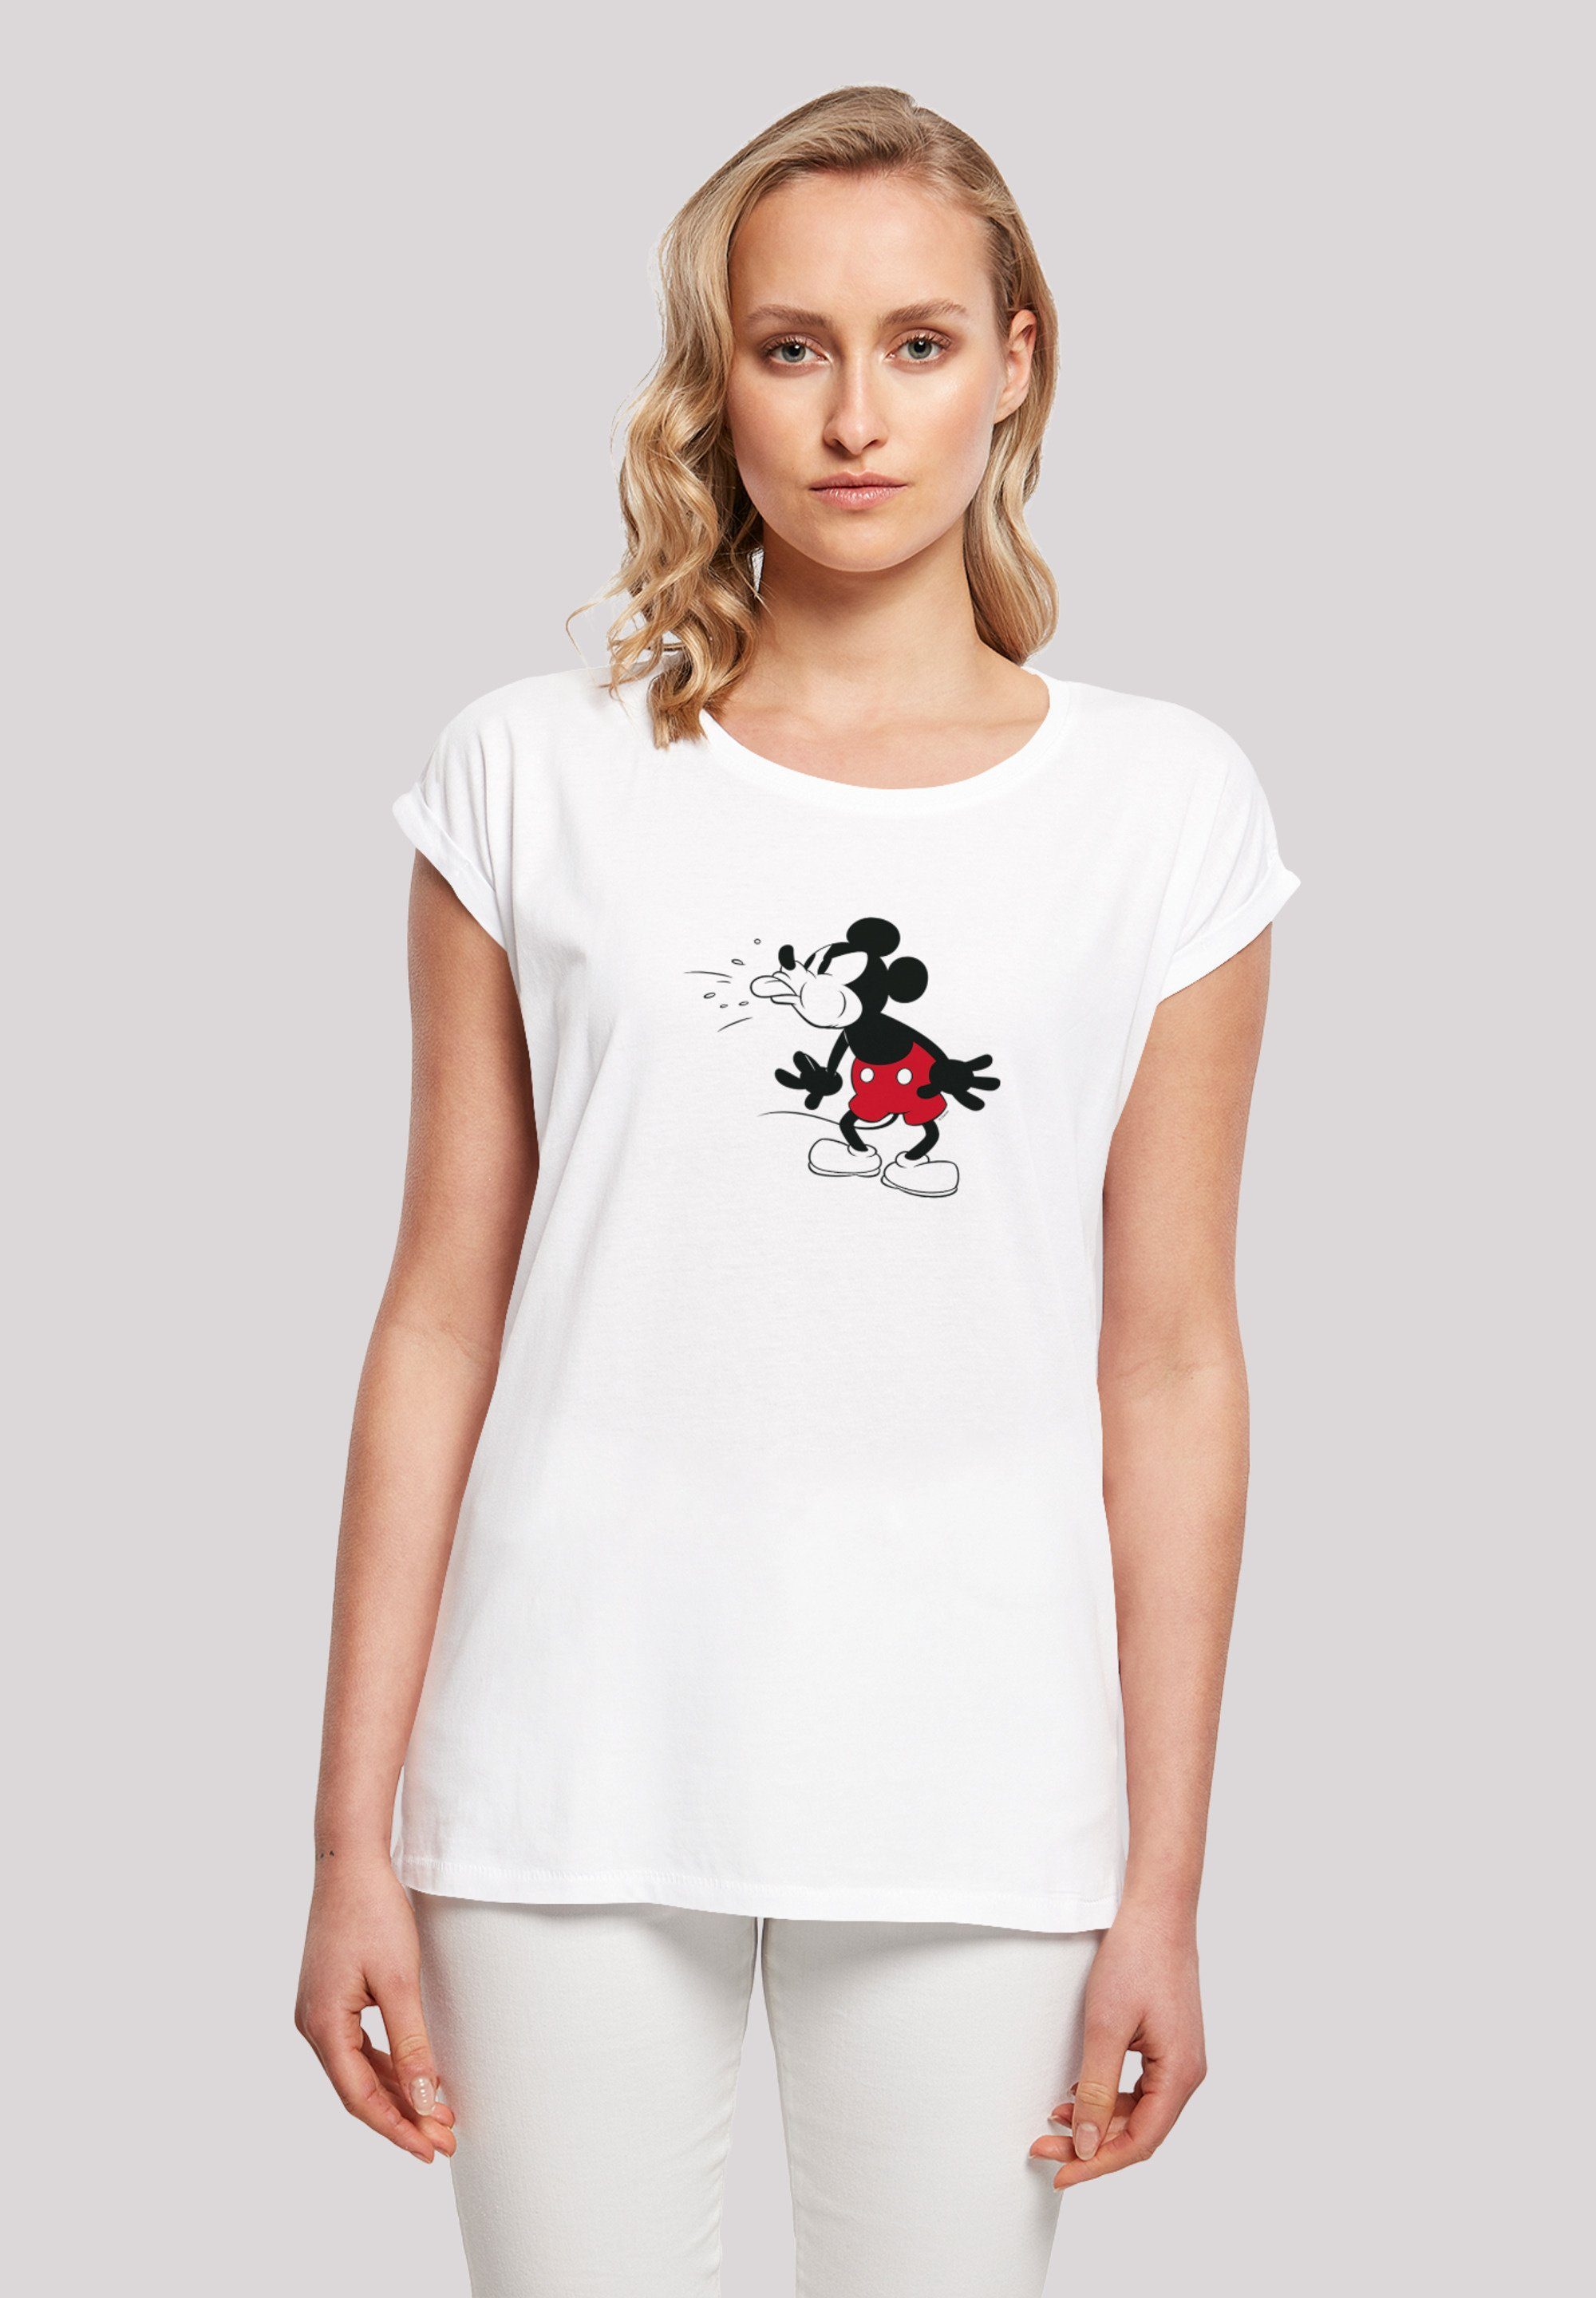 Mouse Maus Micky F4NT4STIC Disney Classic T-Shirt Print Vintage Mickey